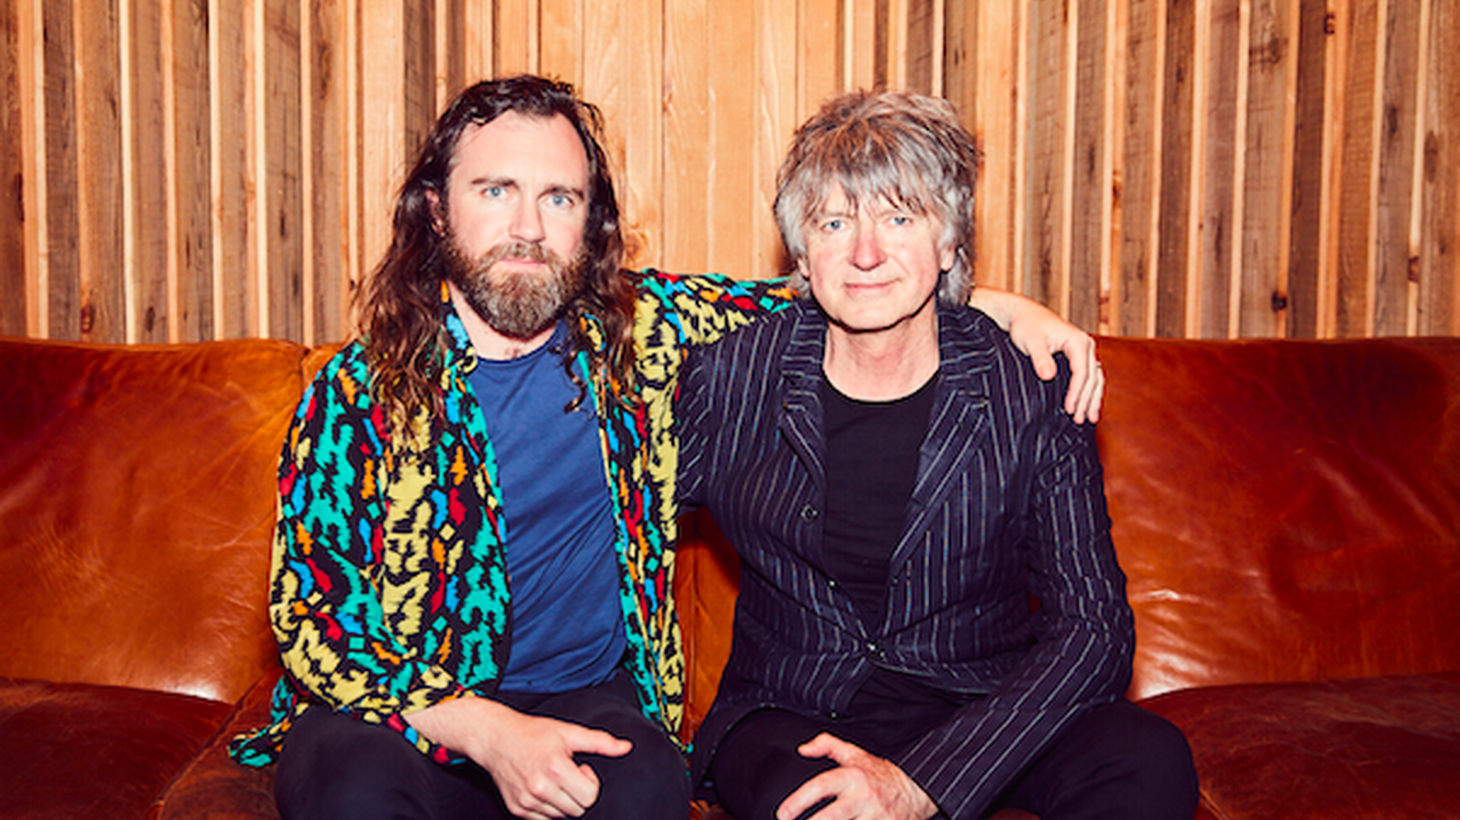 They’ve been playing music together for many, many years, but father/son duo Neil and Liam Finn waited until the time was right to record a proper album together.